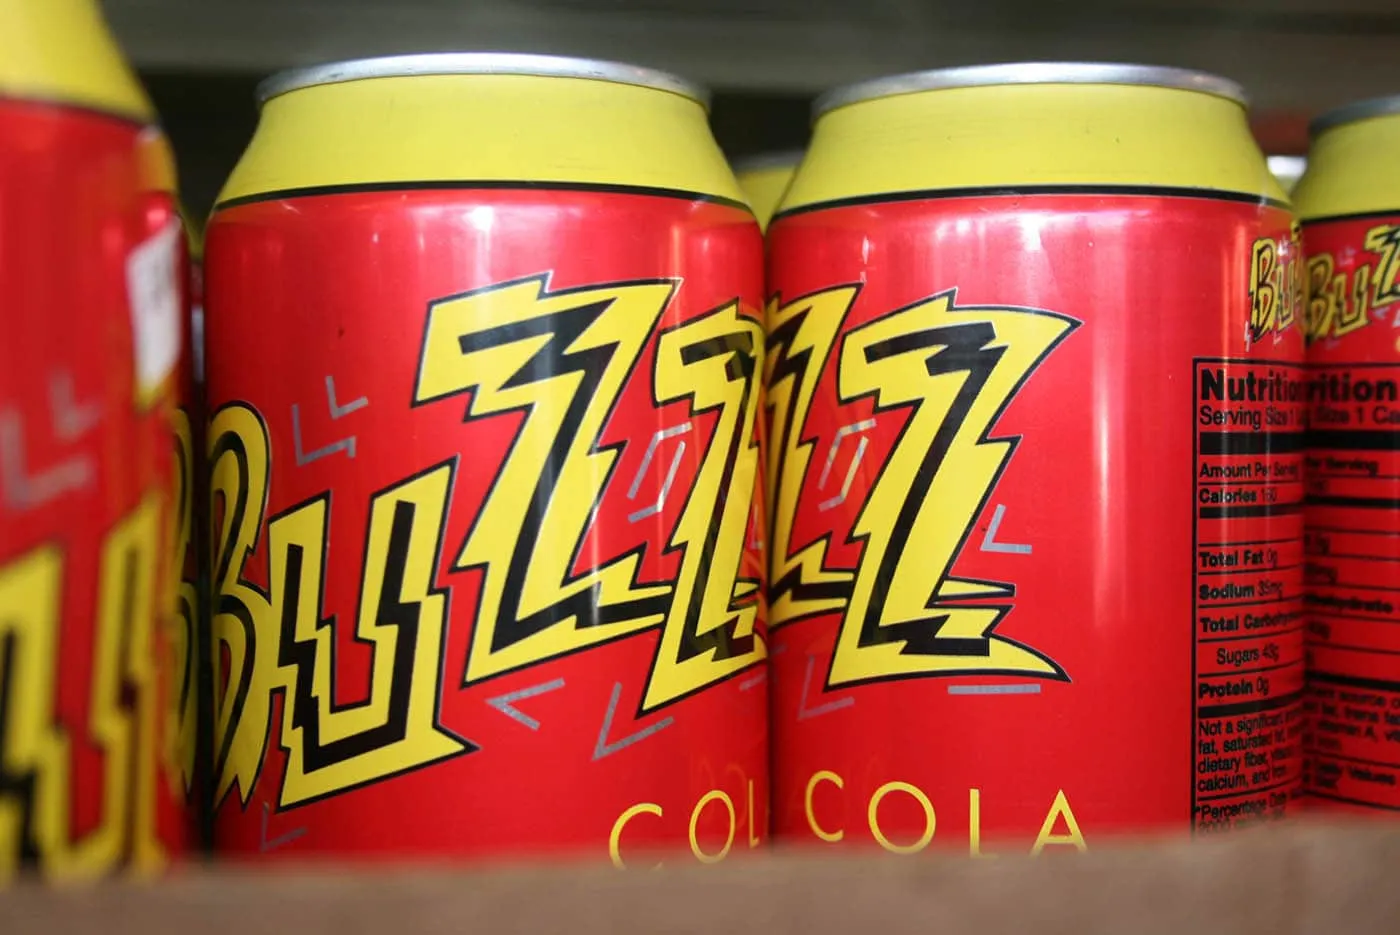 Buzz Cola at The Simpsons Kwik E Mart 7-11 in Chicago, Illinois in Chicago, Illinois